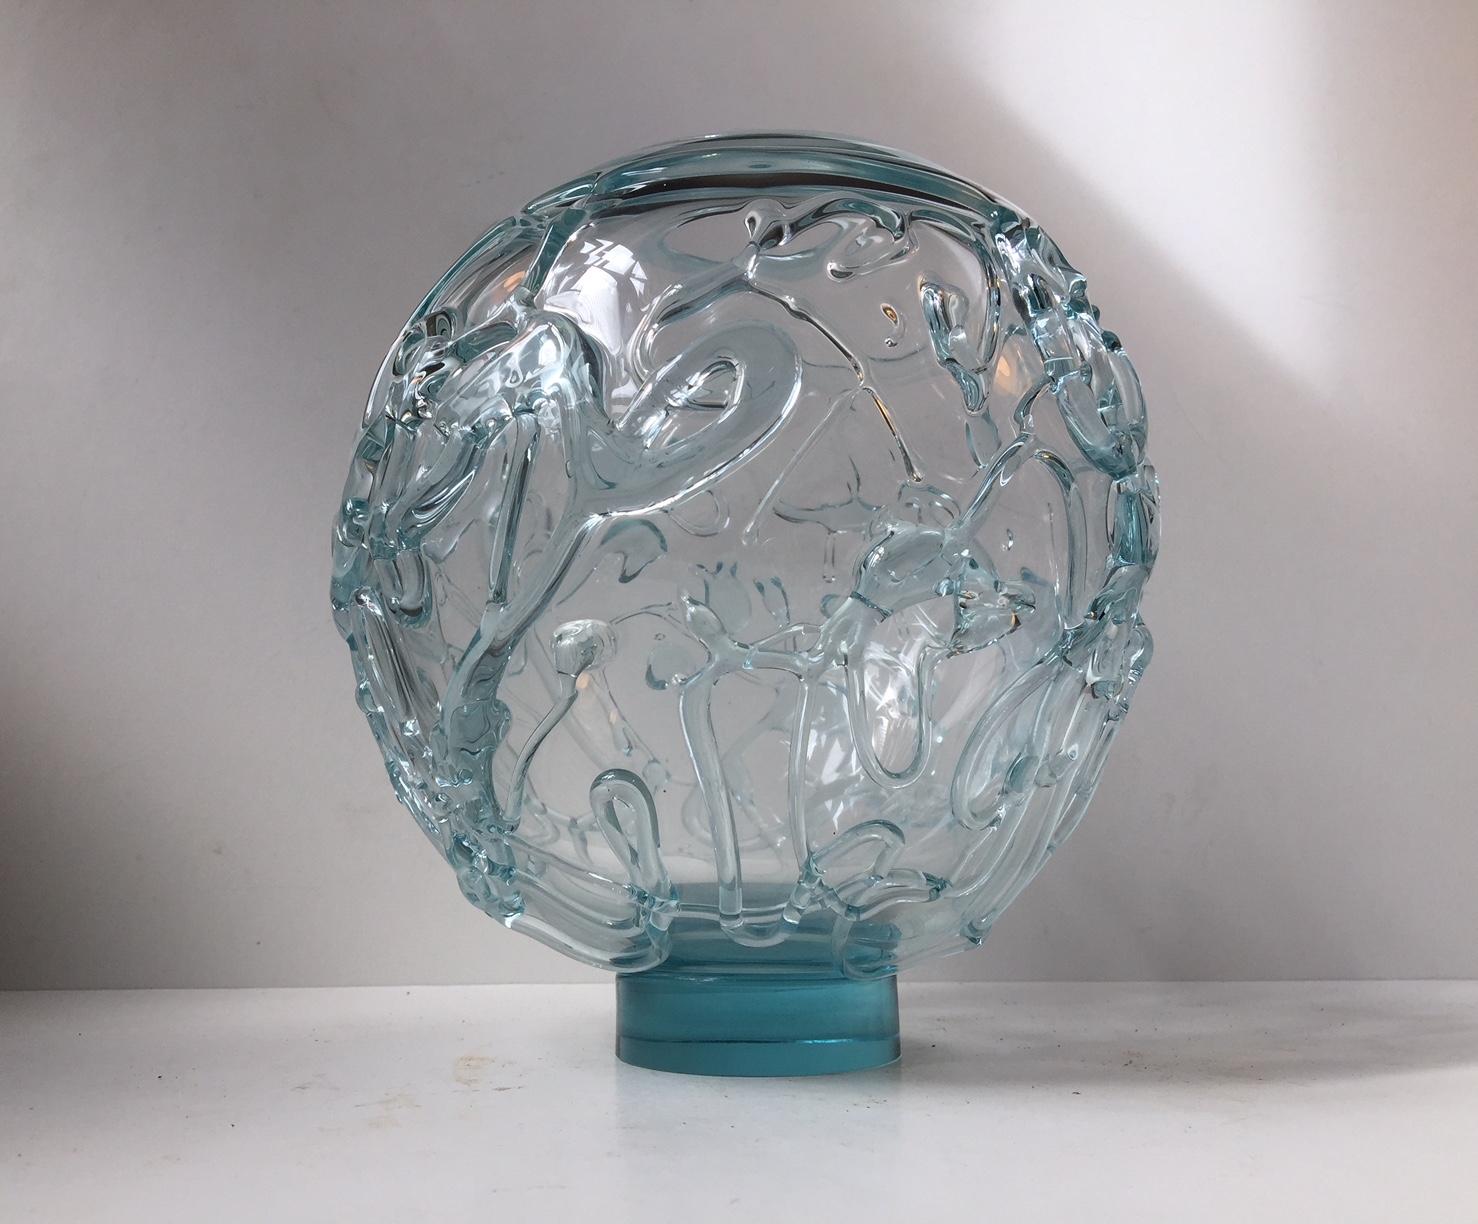 Art Glass Unique Spherical and Abstract Glass Vase by Michael Bang for Holmegaard, Denmark